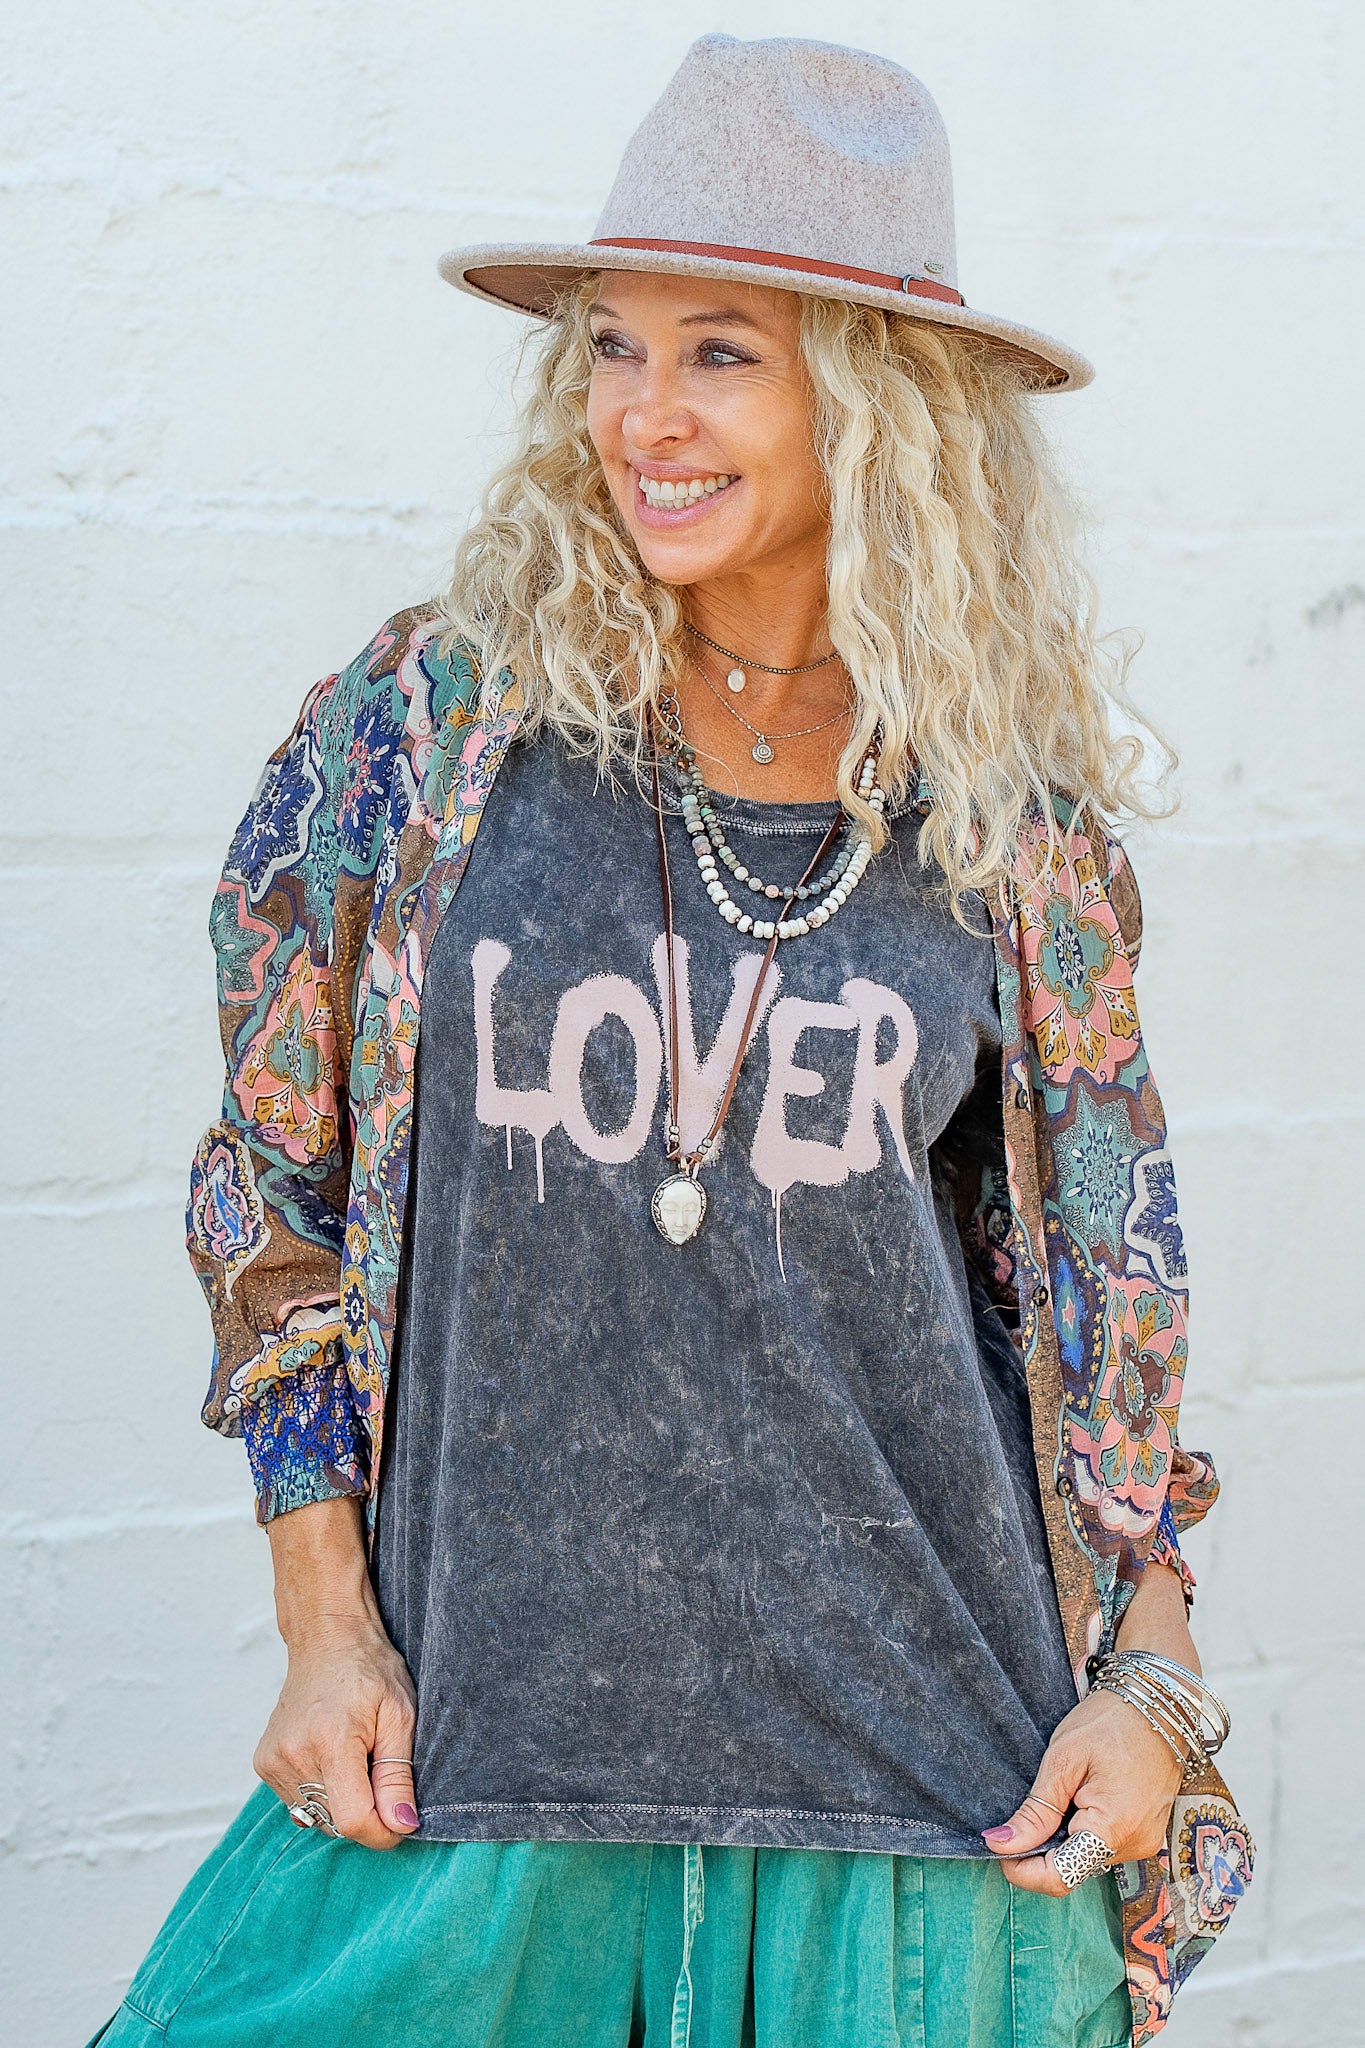 Lover Graffiti Graphic Tee in Charcoal - SpiritedBoutiques Boho Hippie Boutique Style T-Shirt, Promesa